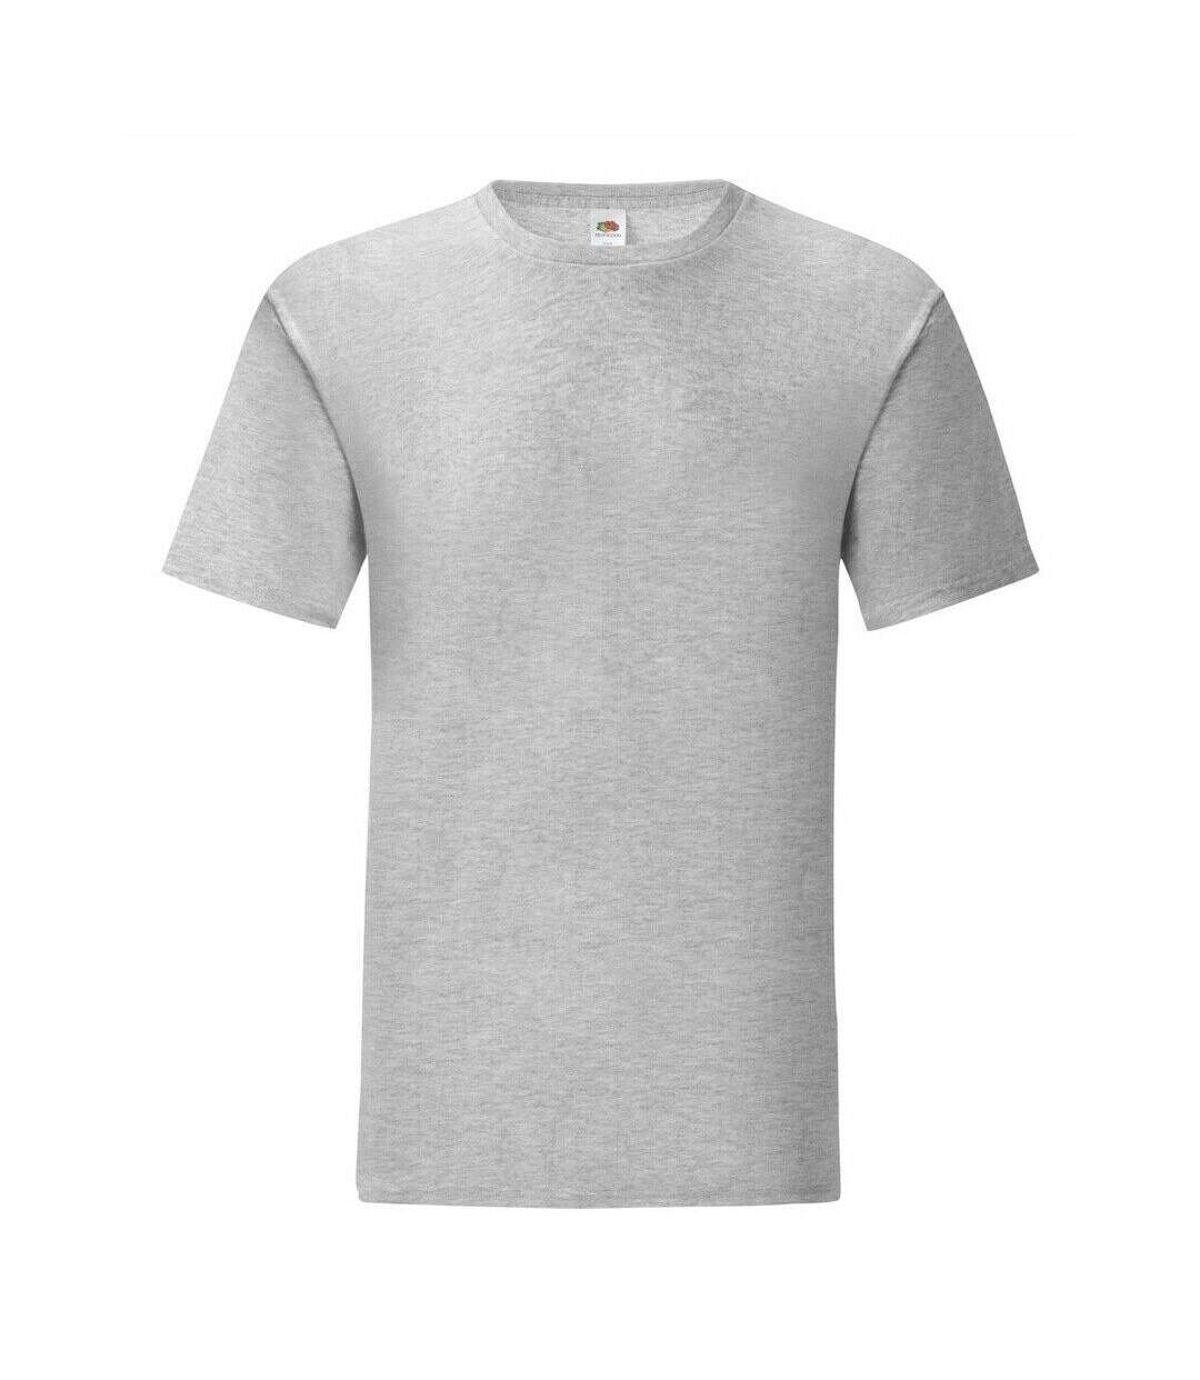 Fruit of the Loom Mens Iconic T-Shirt (Gray)